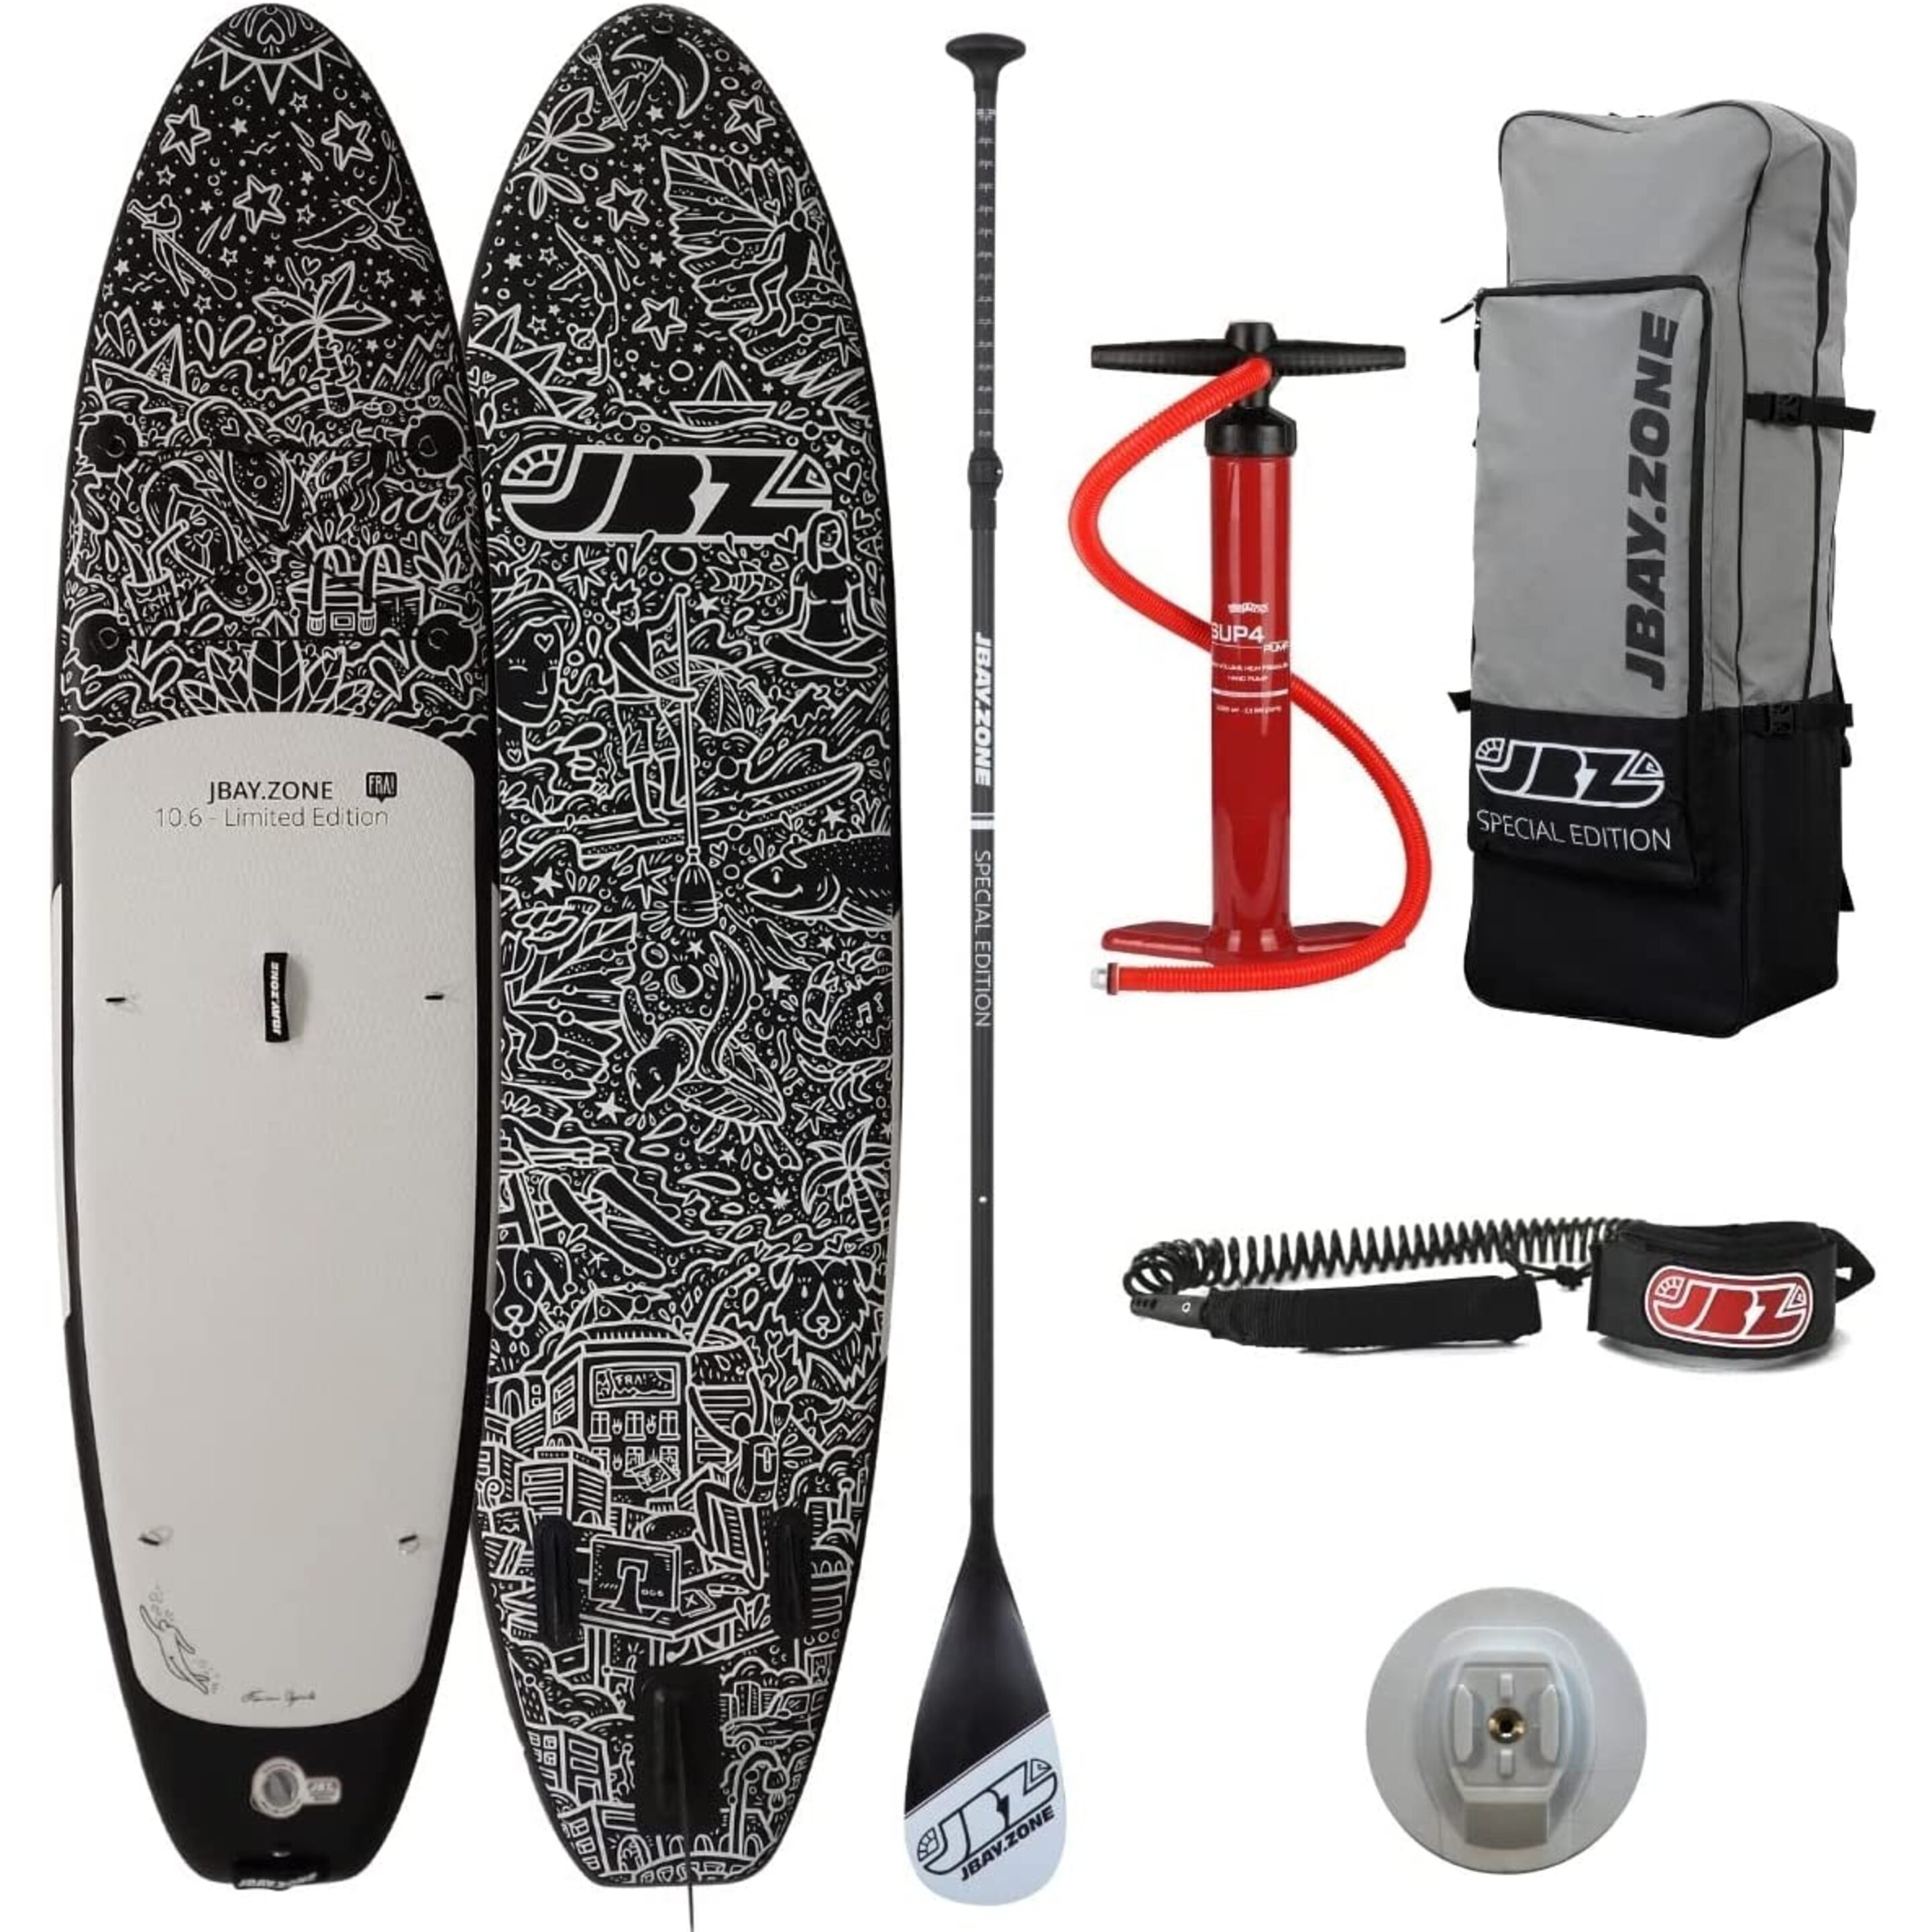 Tabla De Stand Up Paddle Surf Sup Hinchable Jbay.zone Fra! Special Edition - negro-blanco - 